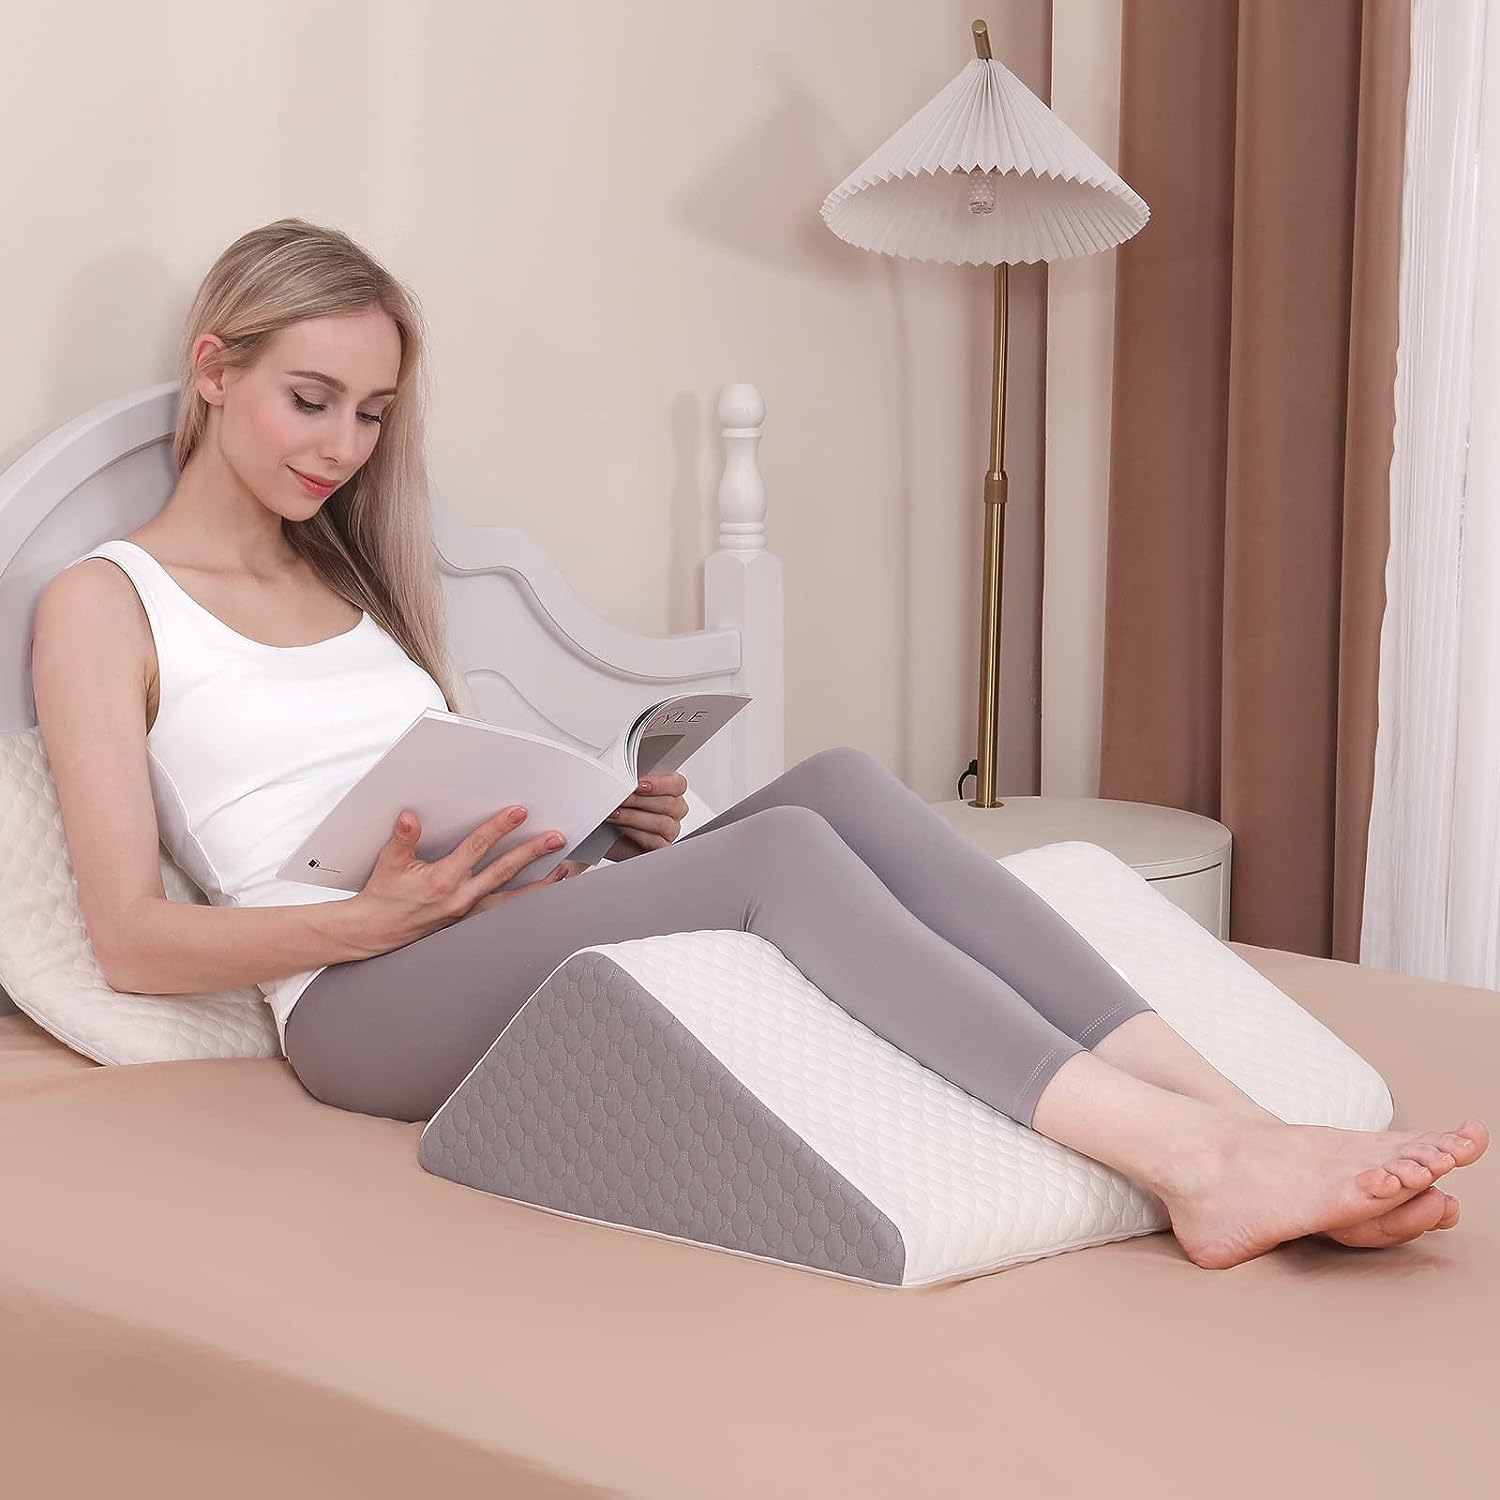 Forias Knee Wedge Pillow 8 Pure Memory Foam Bed Wedge Pillow for Slee